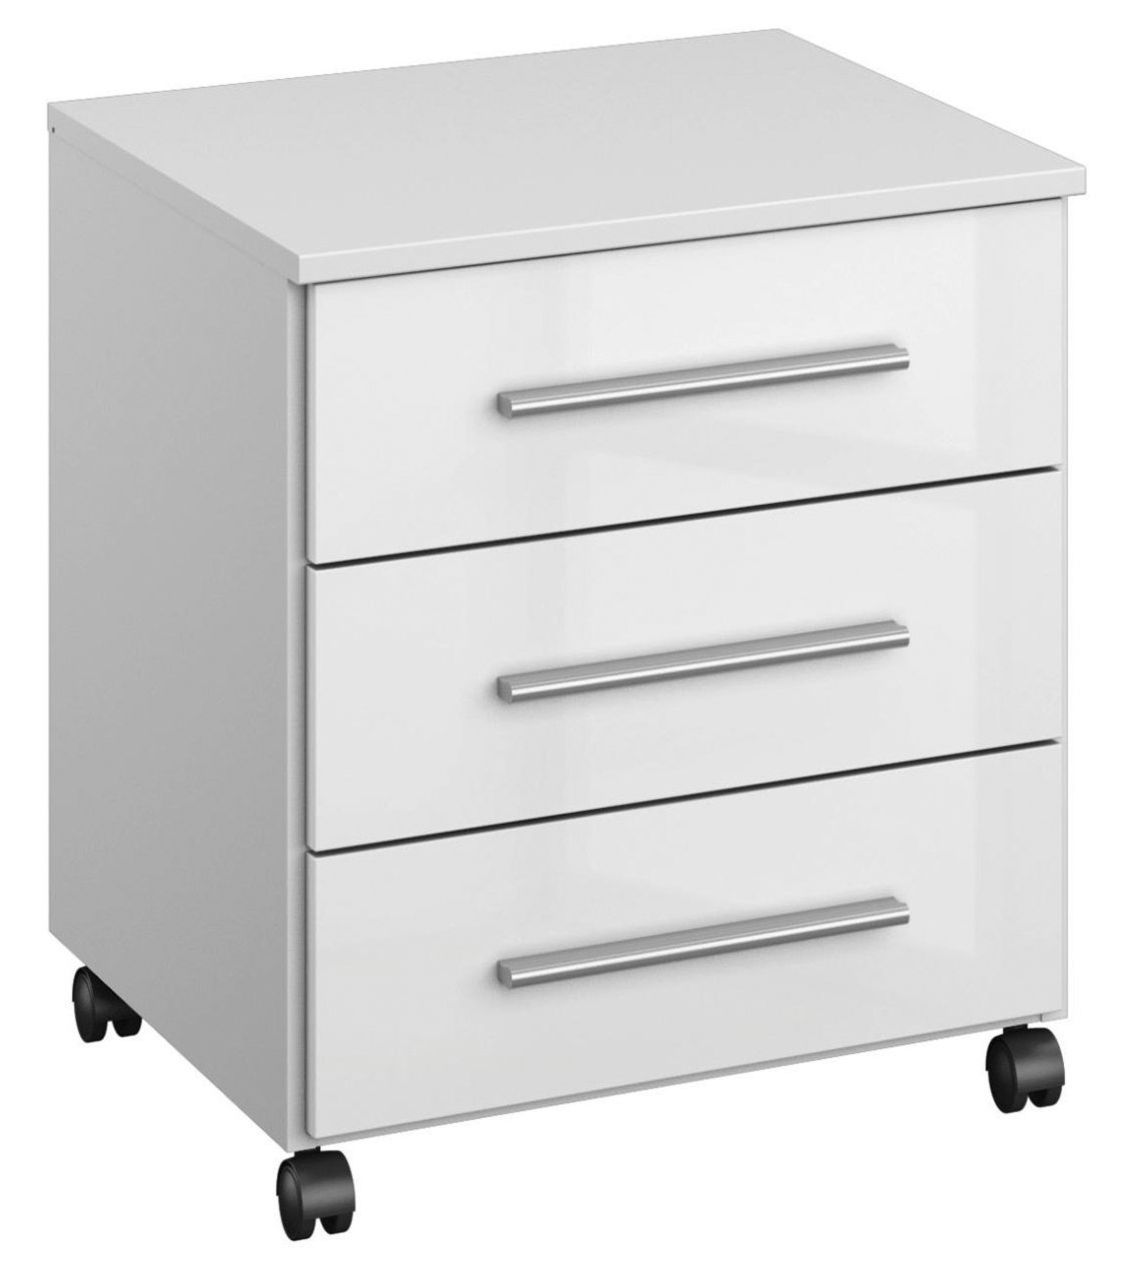 Rauch Home Office Alpine White And High Gloss White 3 Drawer Chest On Castors